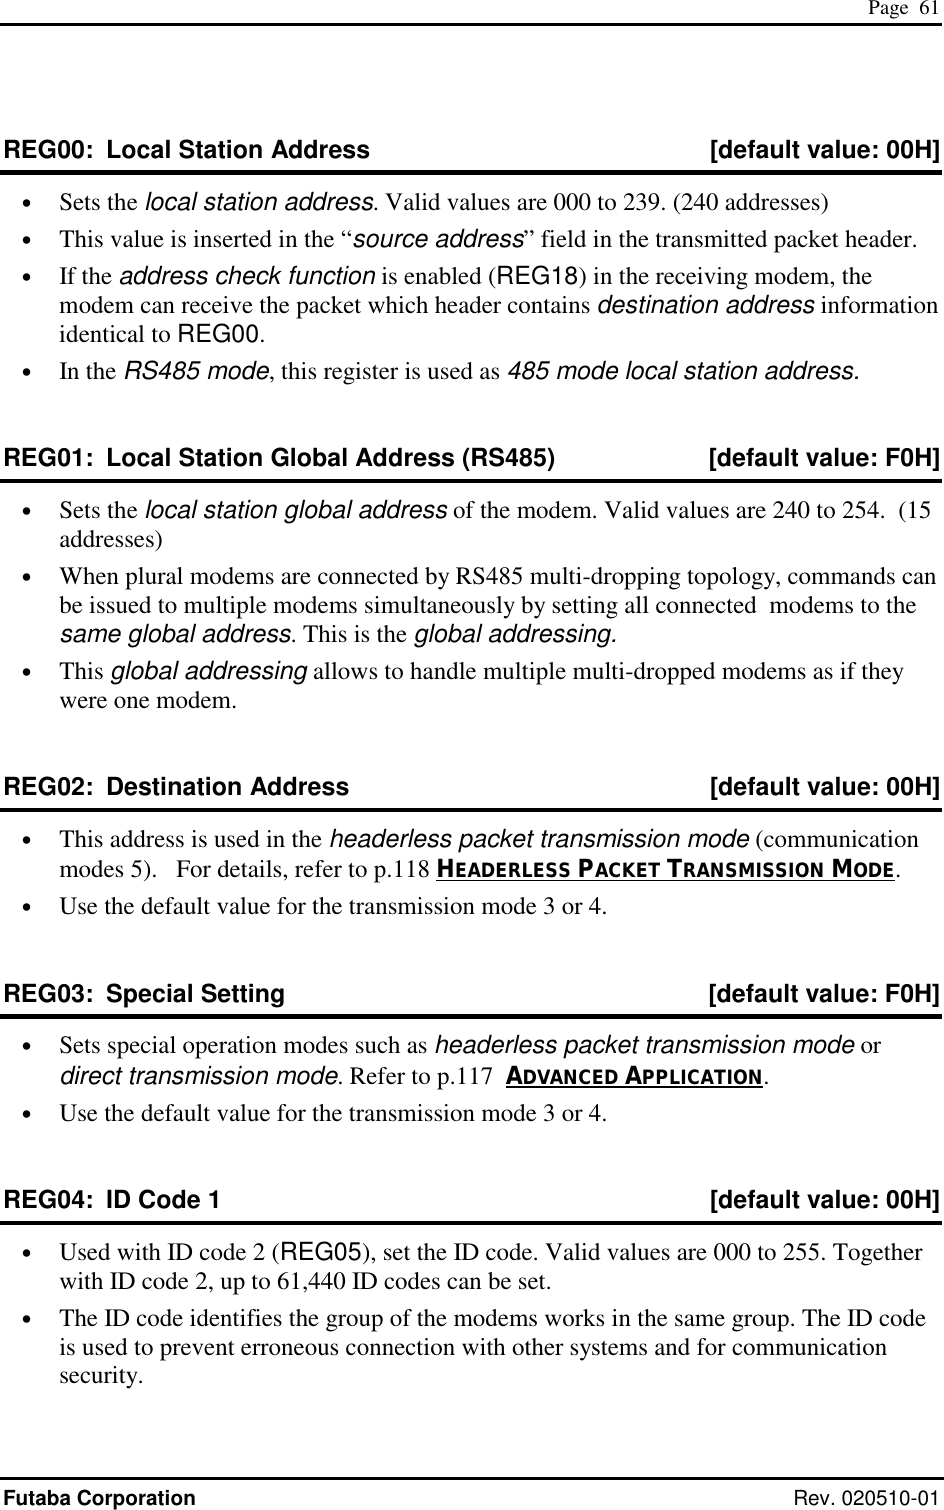  Page  61 Futaba Corporation Rev. 020510-01 REG00:  Local Station Address  [default value: 00H] •  Sets the local station address. Valid values are 000 to 239. (240 addresses) •  This value is inserted in the “source address” field in the transmitted packet header. •  If the address check function is enabled (REG18) in the receiving modem, the modem can receive the packet which header contains destination address information identical to REG00. •  In the RS485 mode, this register is used as 485 mode local station address. REG01:  Local Station Global Address (RS485)  [default value: F0H] •  Sets the local station global address of the modem. Valid values are 240 to 254.  (15 addresses) •  When plural modems are connected by RS485 multi-dropping topology, commands can be issued to multiple modems simultaneously by setting all connected  modems to the same global address. This is the global addressing. •  This global addressing allows to handle multiple multi-dropped modems as if they were one modem. REG02:  Destination Address  [default value: 00H] •  This address is used in the headerless packet transmission mode (communication modes 5).   For details, refer to p.118 HEADERLESS PACKET TRANSMISSION MODE. •  Use the default value for the transmission mode 3 or 4. REG03:  Special Setting  [default value: F0H] •  Sets special operation modes such as headerless packet transmission mode or direct transmission mode. Refer to p.117  ADVANCED APPLICATION. •  Use the default value for the transmission mode 3 or 4. REG04:  ID Code 1  [default value: 00H] •  Used with ID code 2 (REG05), set the ID code. Valid values are 000 to 255. Together with ID code 2, up to 61,440 ID codes can be set. •  The ID code identifies the group of the modems works in the same group. The ID code is used to prevent erroneous connection with other systems and for communication security. 